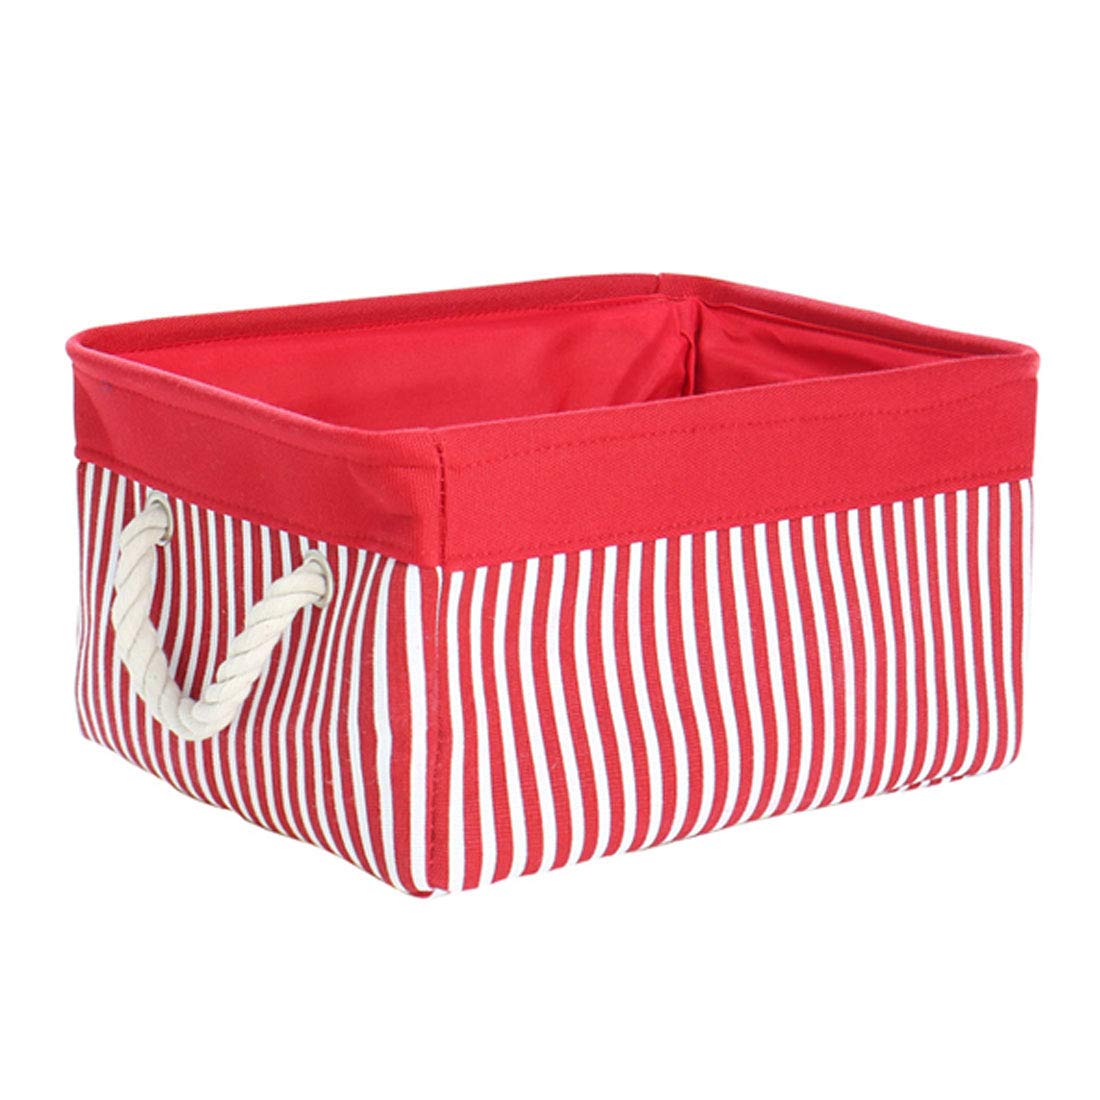 uxcell Storage Basket Bin, Collapsible Laundry Basket with Rope Handles,Decorative Fabric Basket for Shelves Office Closet Organizer, Red (Small - 13.8"x9.8"x6.7")